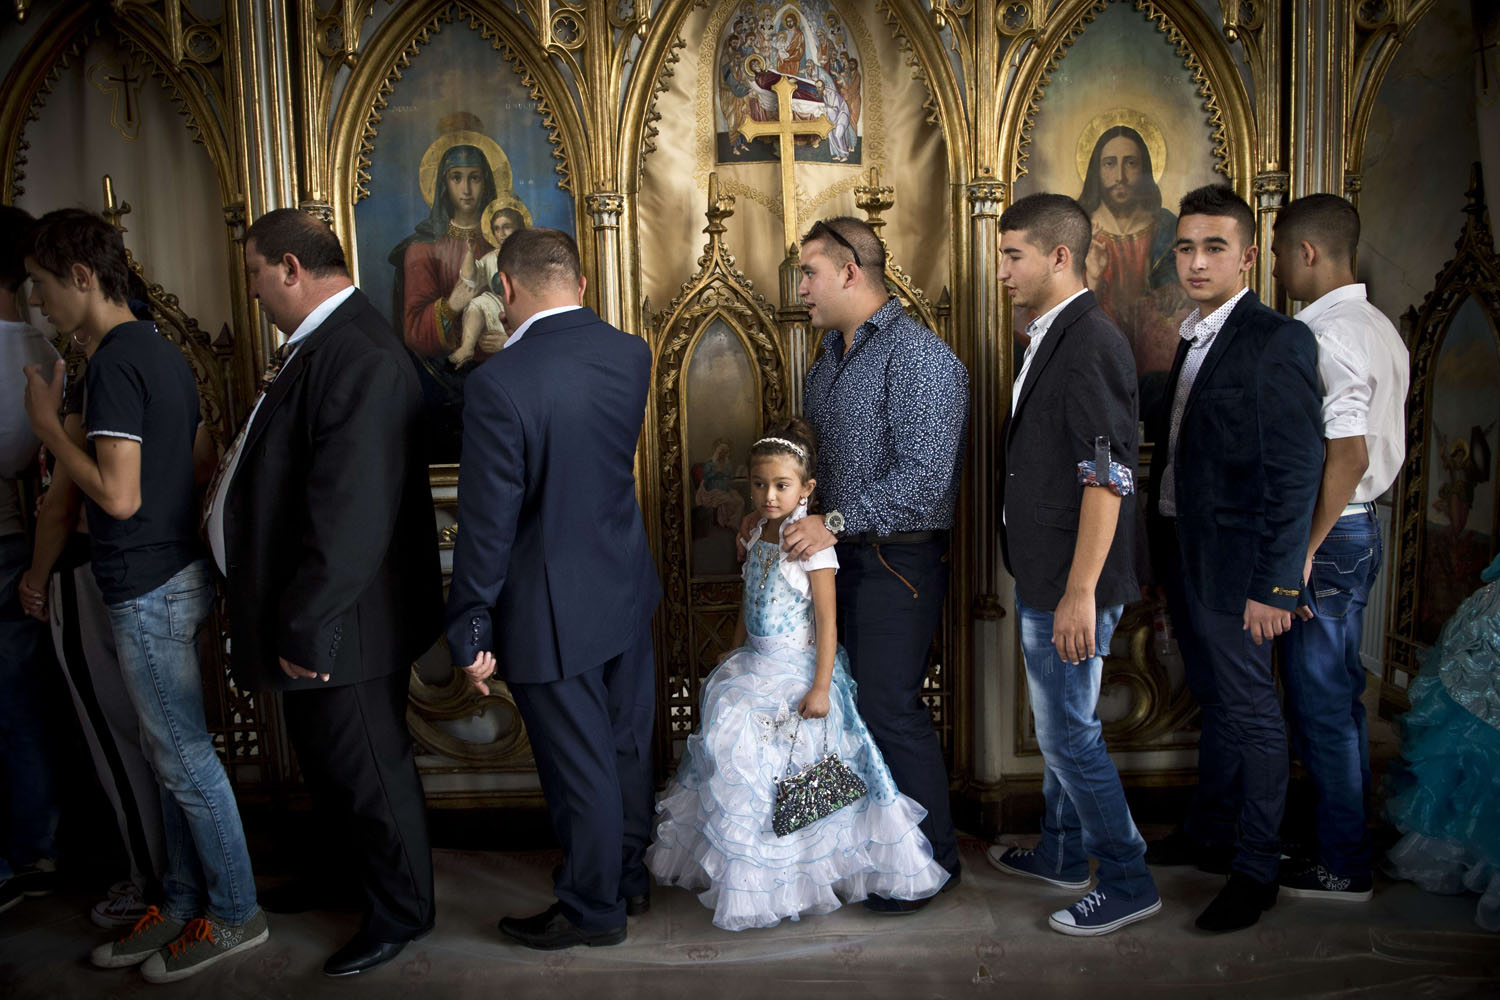 Sept. 8, 2014. People pass by icons during a religious service at the Bistrita Monastery in Costesti, Romania.